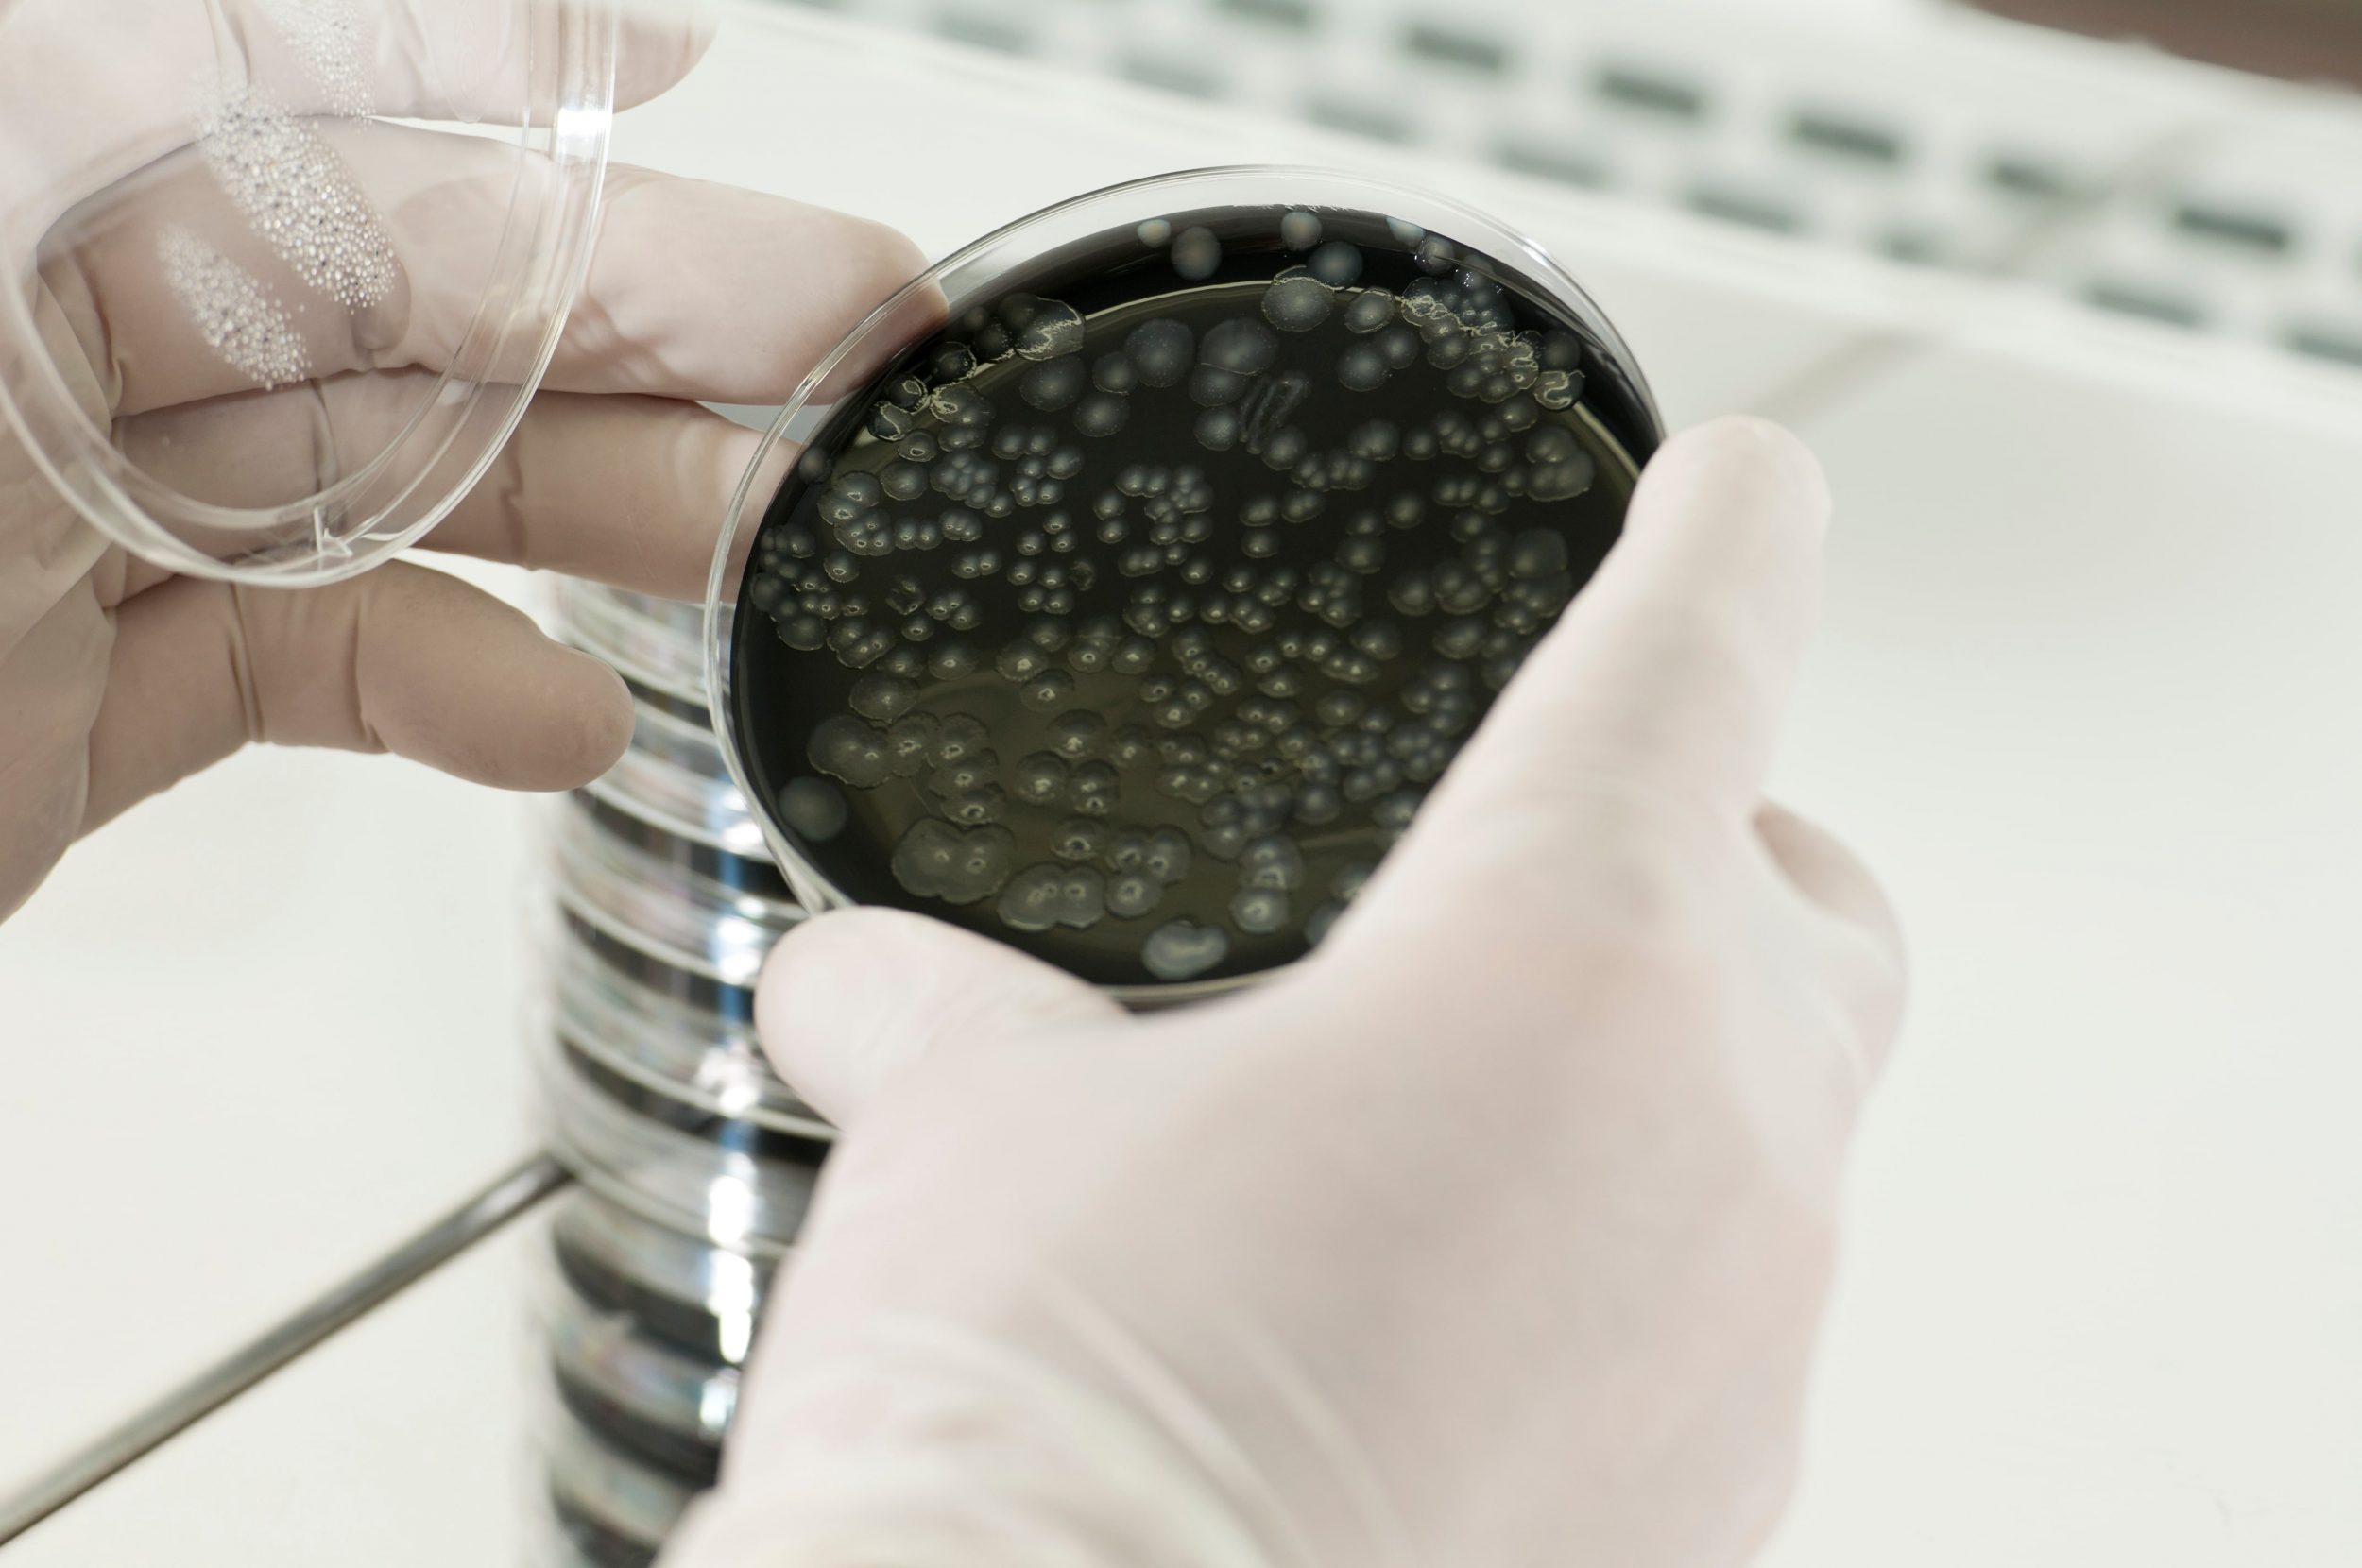 Legionella Water Testing And Control Total Water Solutions